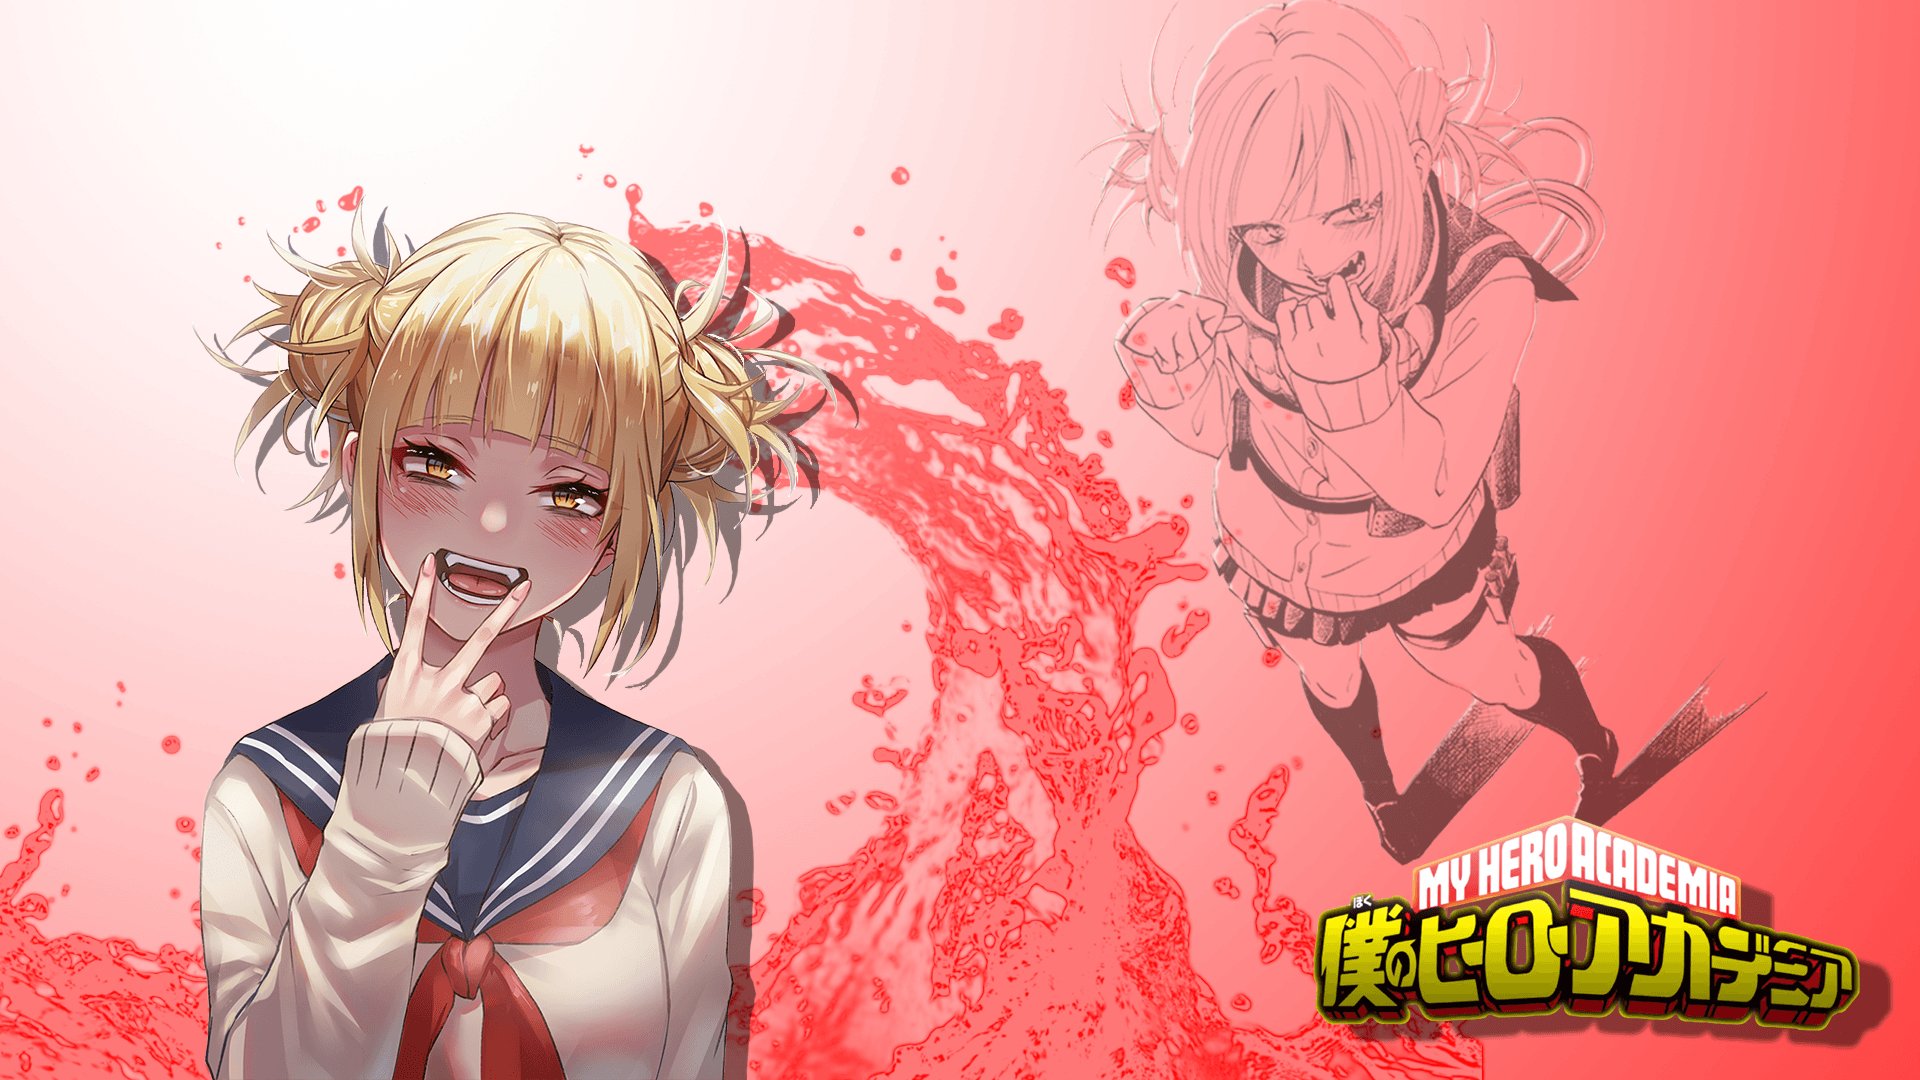 Anime Toga Himiko Wallpapers Wallpaper Cave 1141